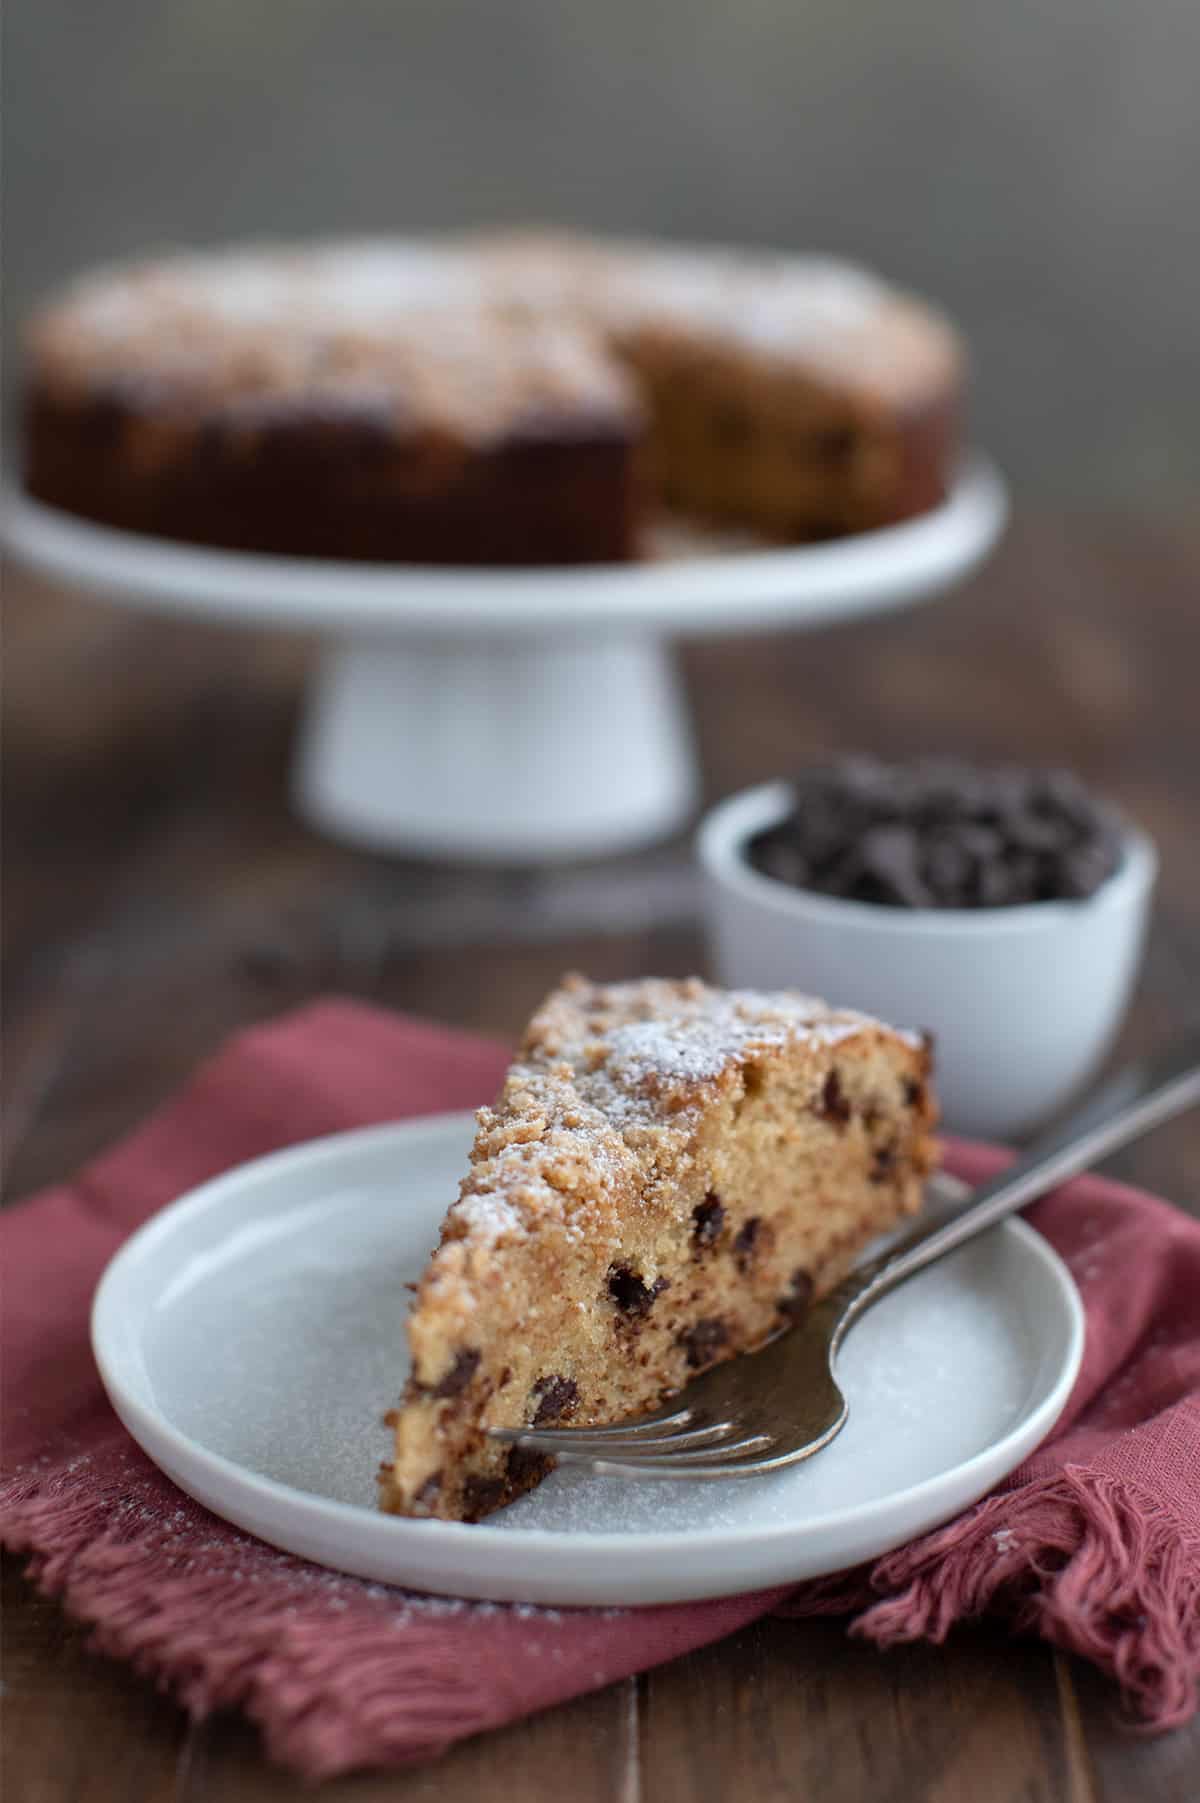 A slice of keto sour cream coffee cake on a white plate with a bowl of chocolate chips in the background.